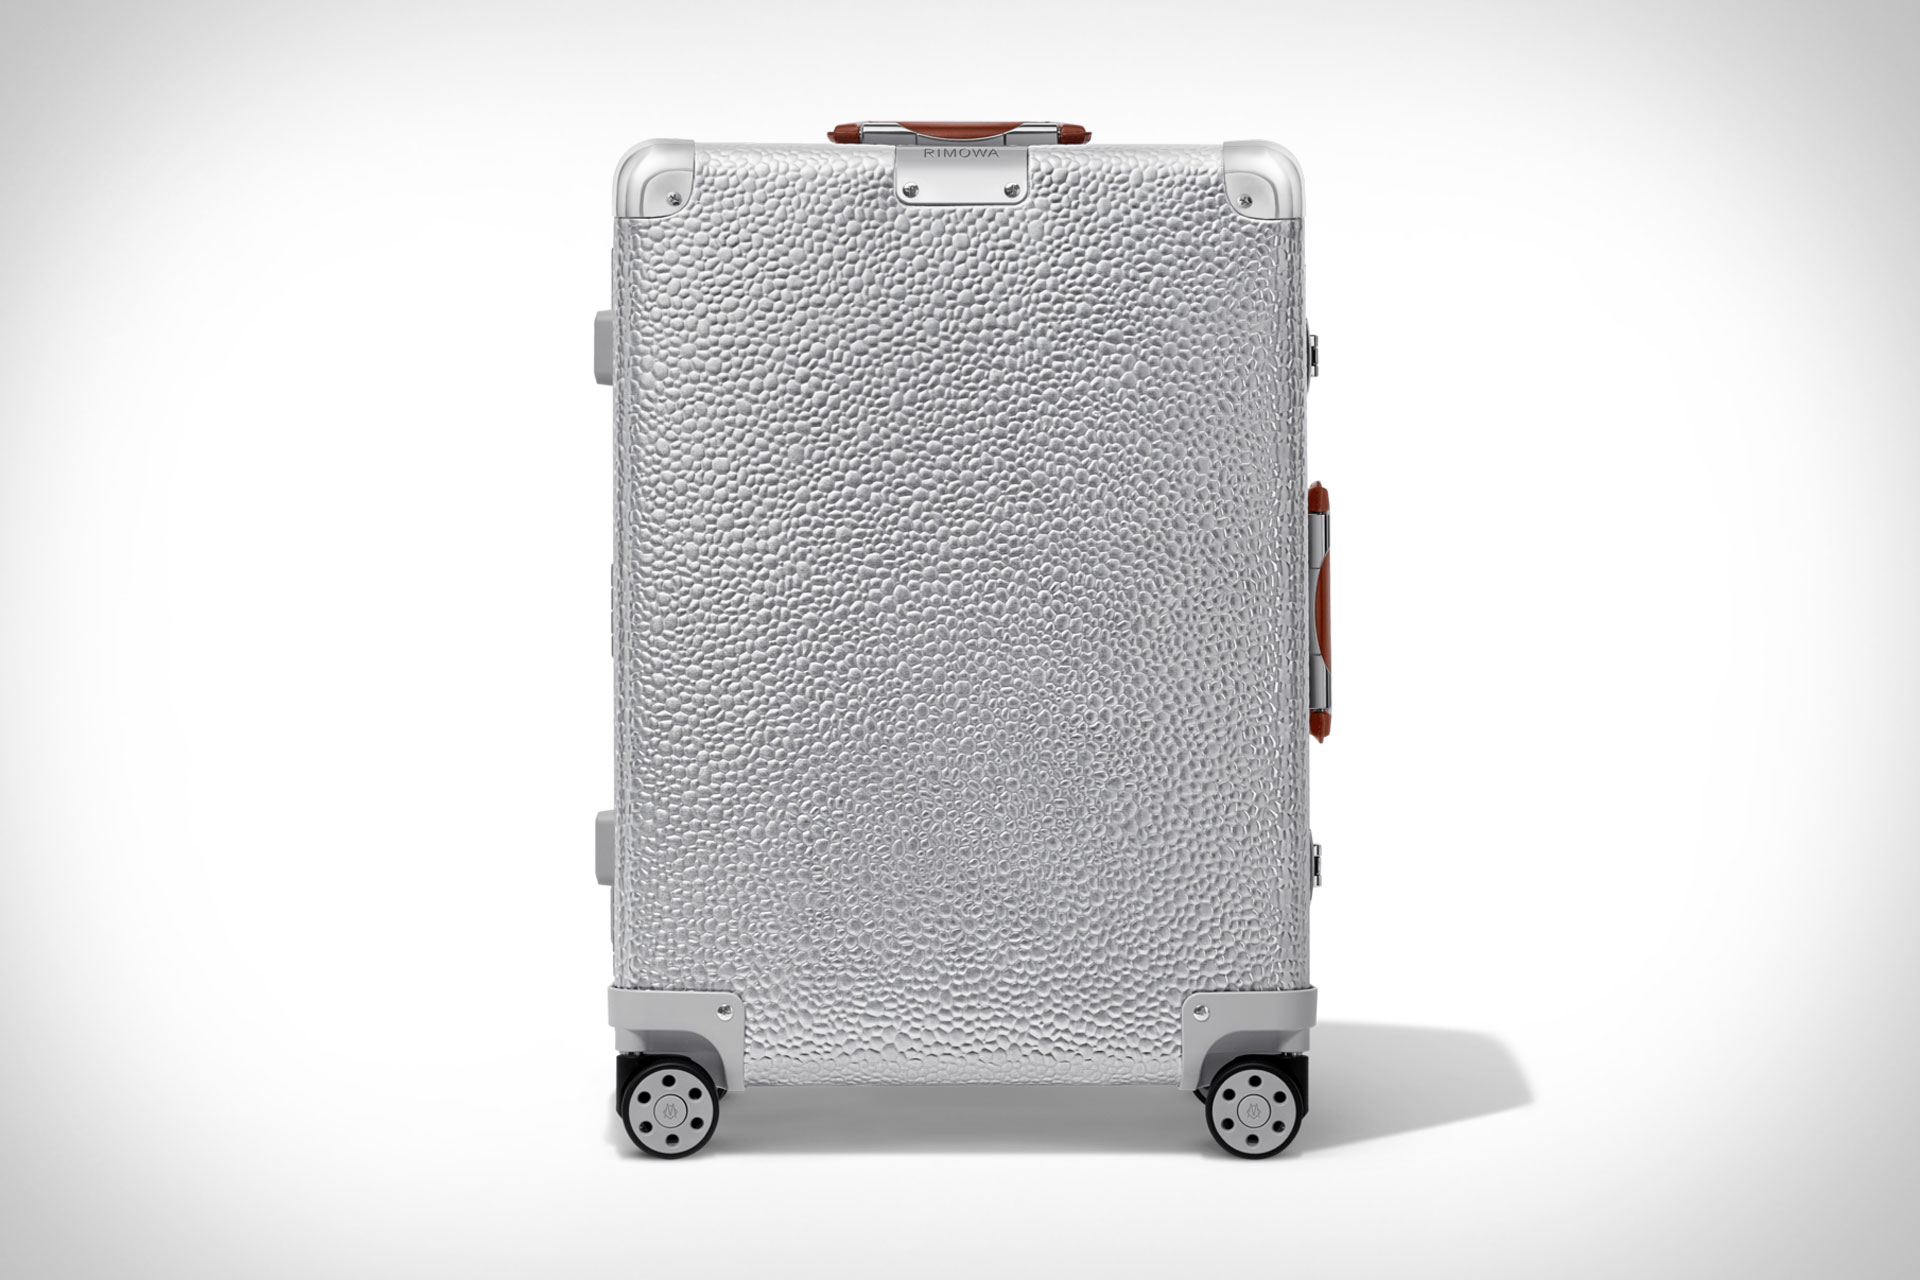 Rimowa Hammerschlag Luggage Collection | Uncrate, #Rimowa #Hammerschlag #Luggage #Collection #Uncrate